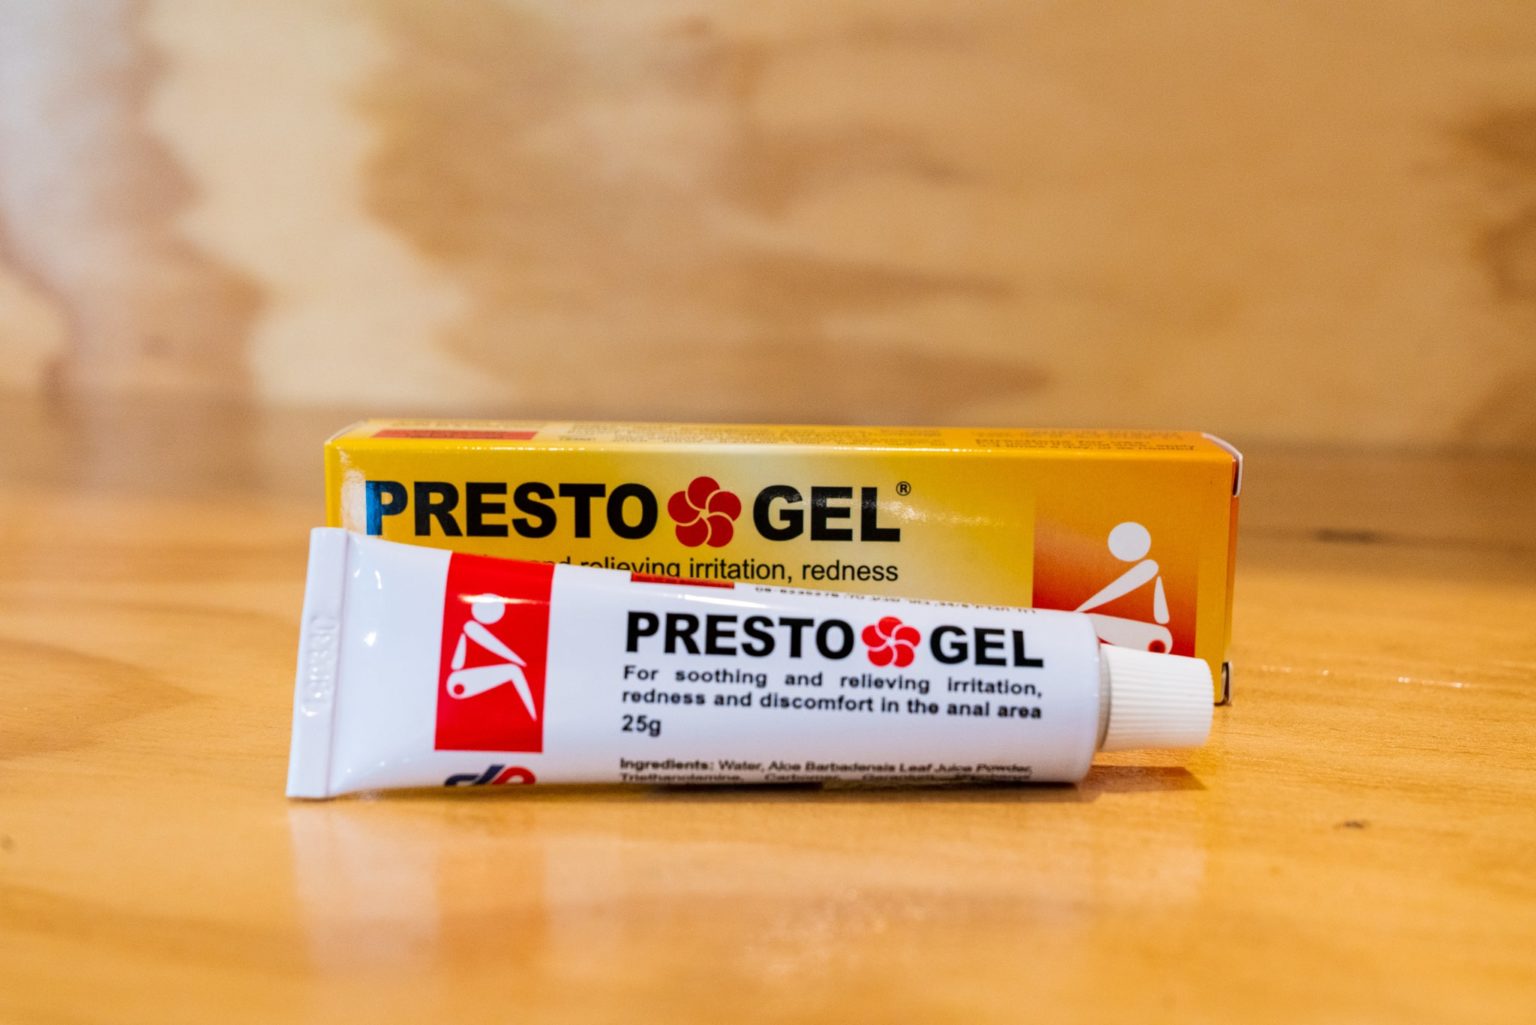 Presto Gel Treatment Lasting Relief The Way Nature Intended 7461